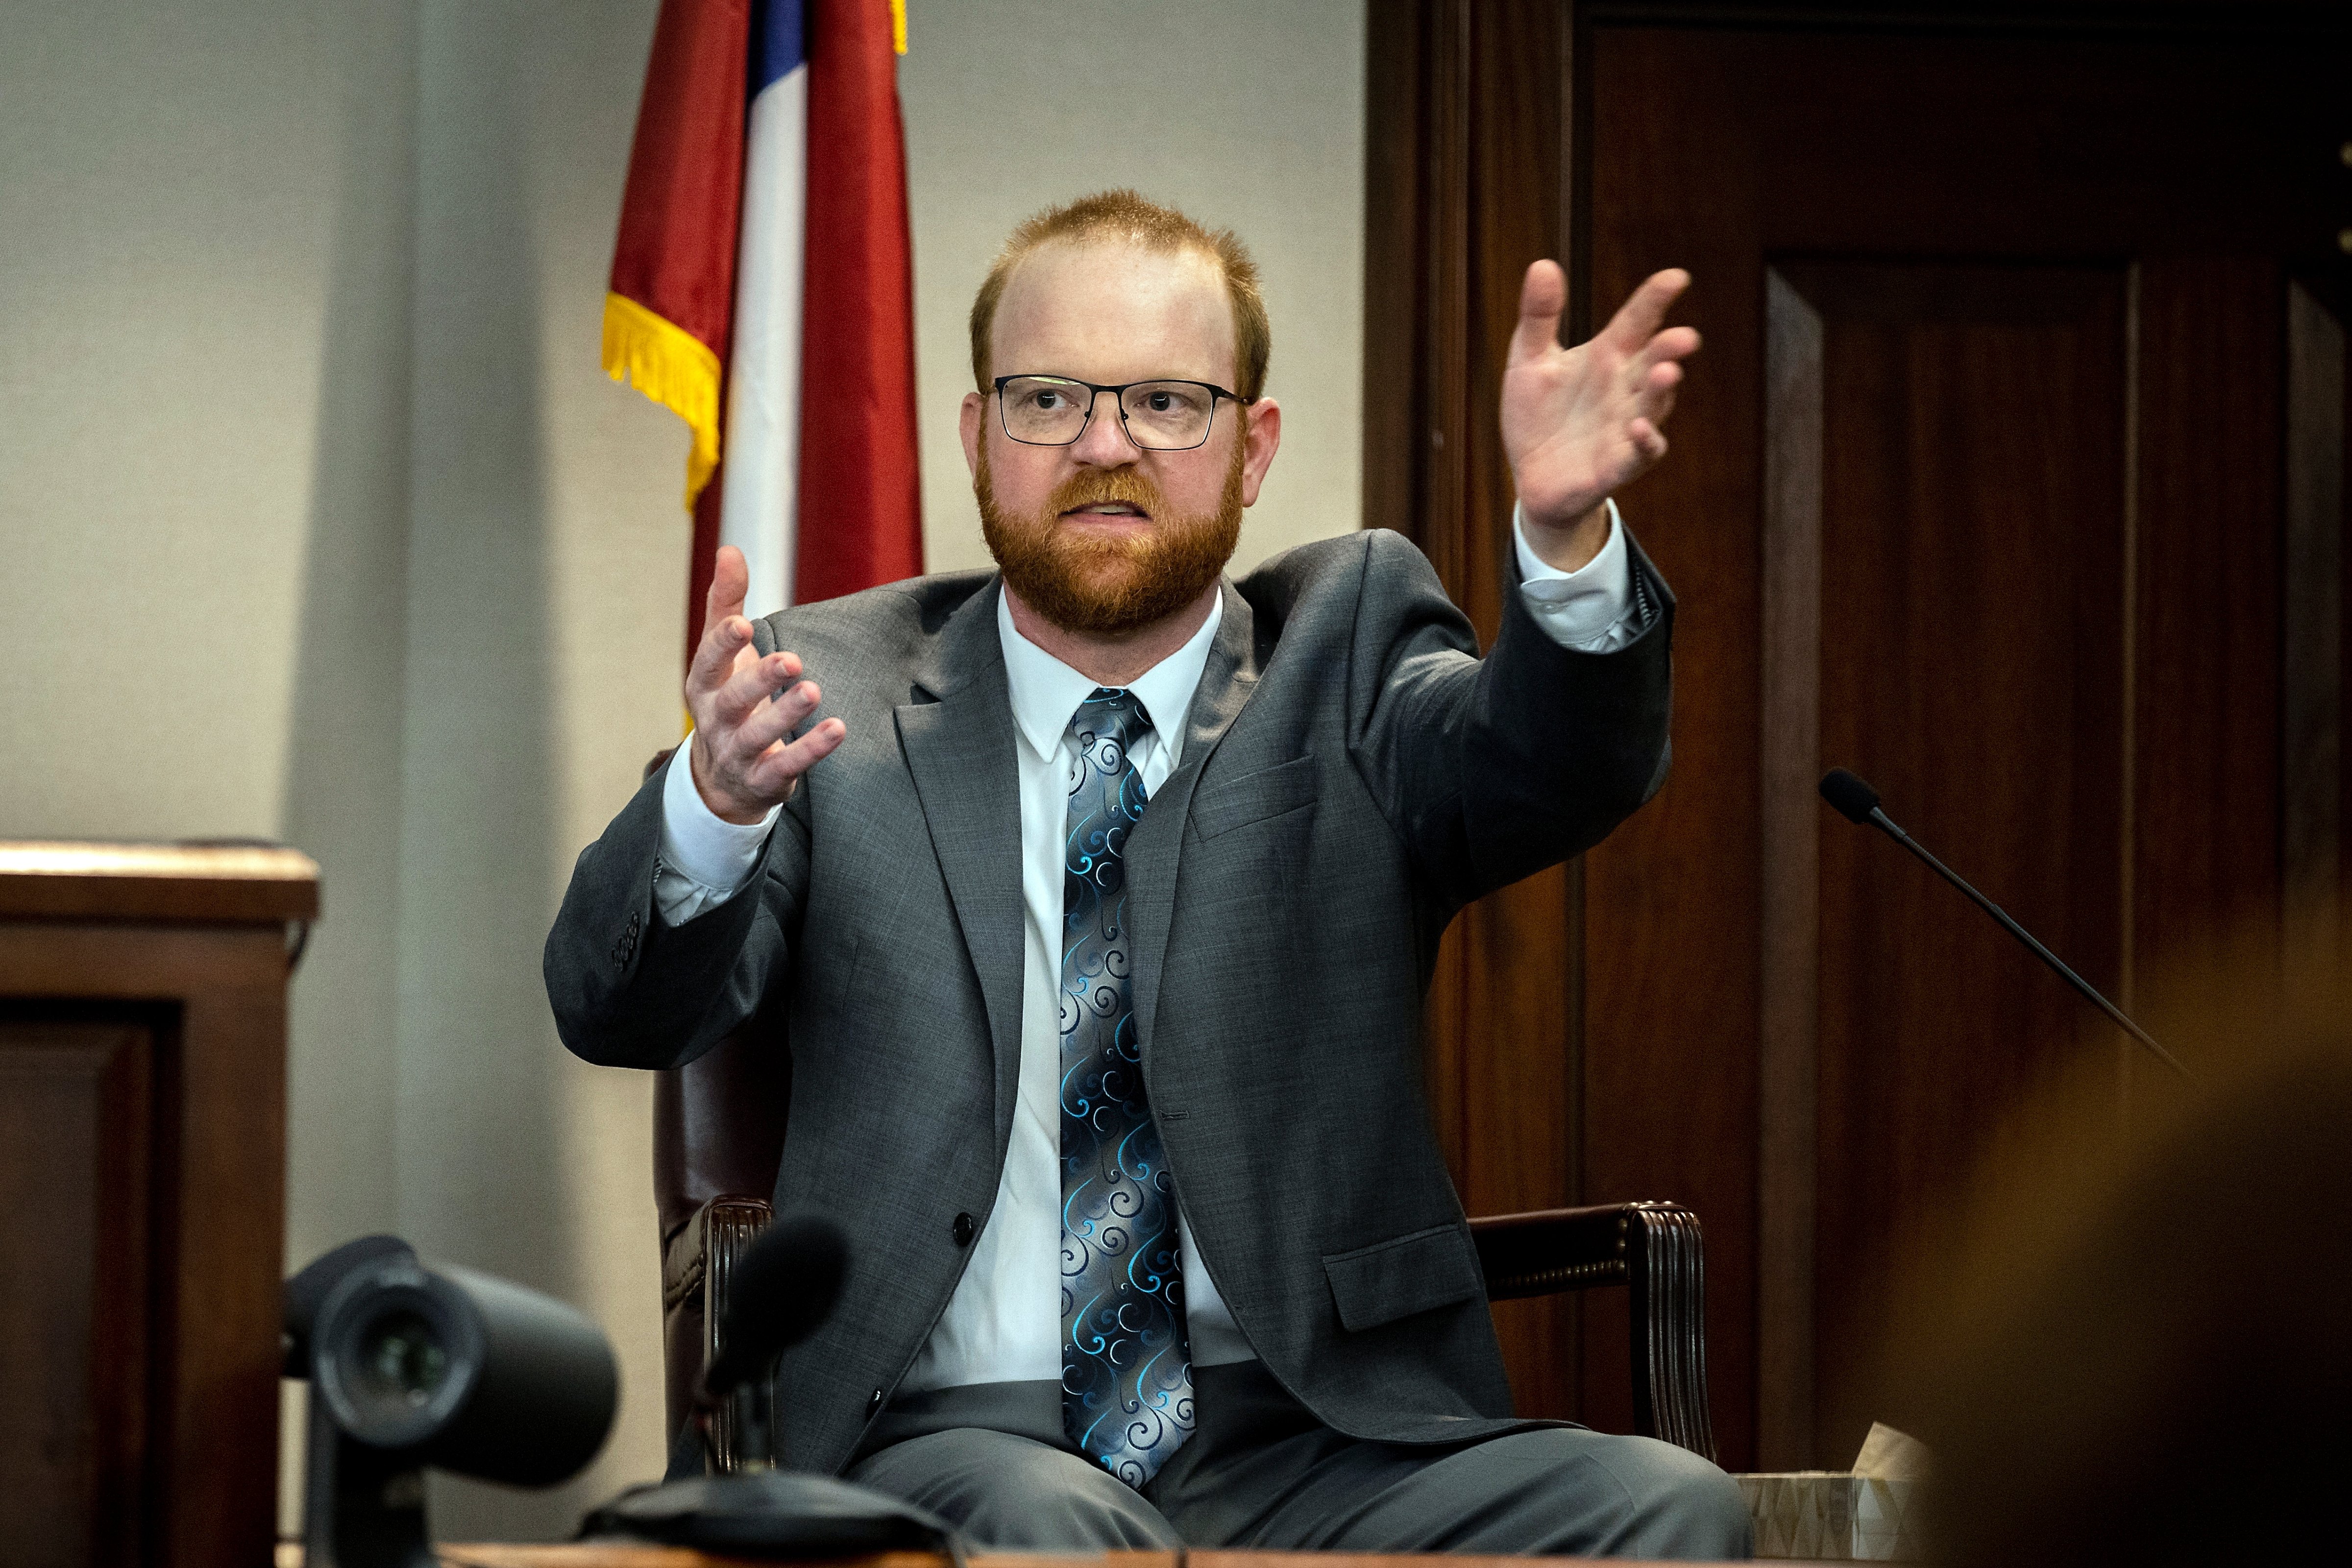 Travis McMichael speaks from the witness stand during his murder trial in the shooting death of Ahmaud Arbery, on Nov. 17, 2021, in Brunswick, Georgia. (Stephen B. Morton—AP/Pool)